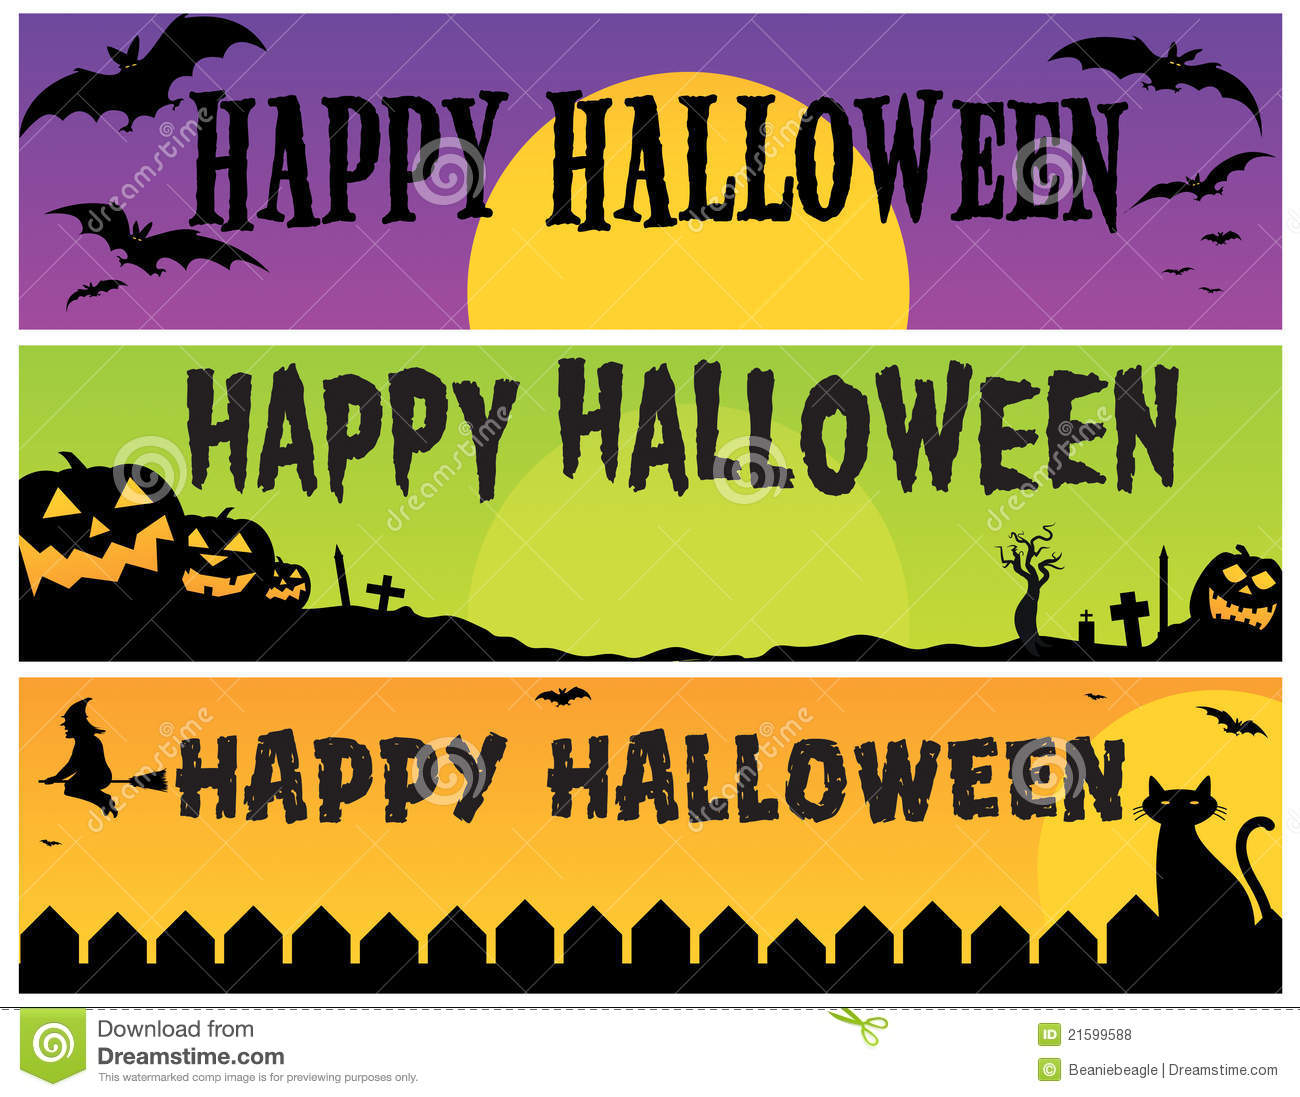 10  images about halloween on